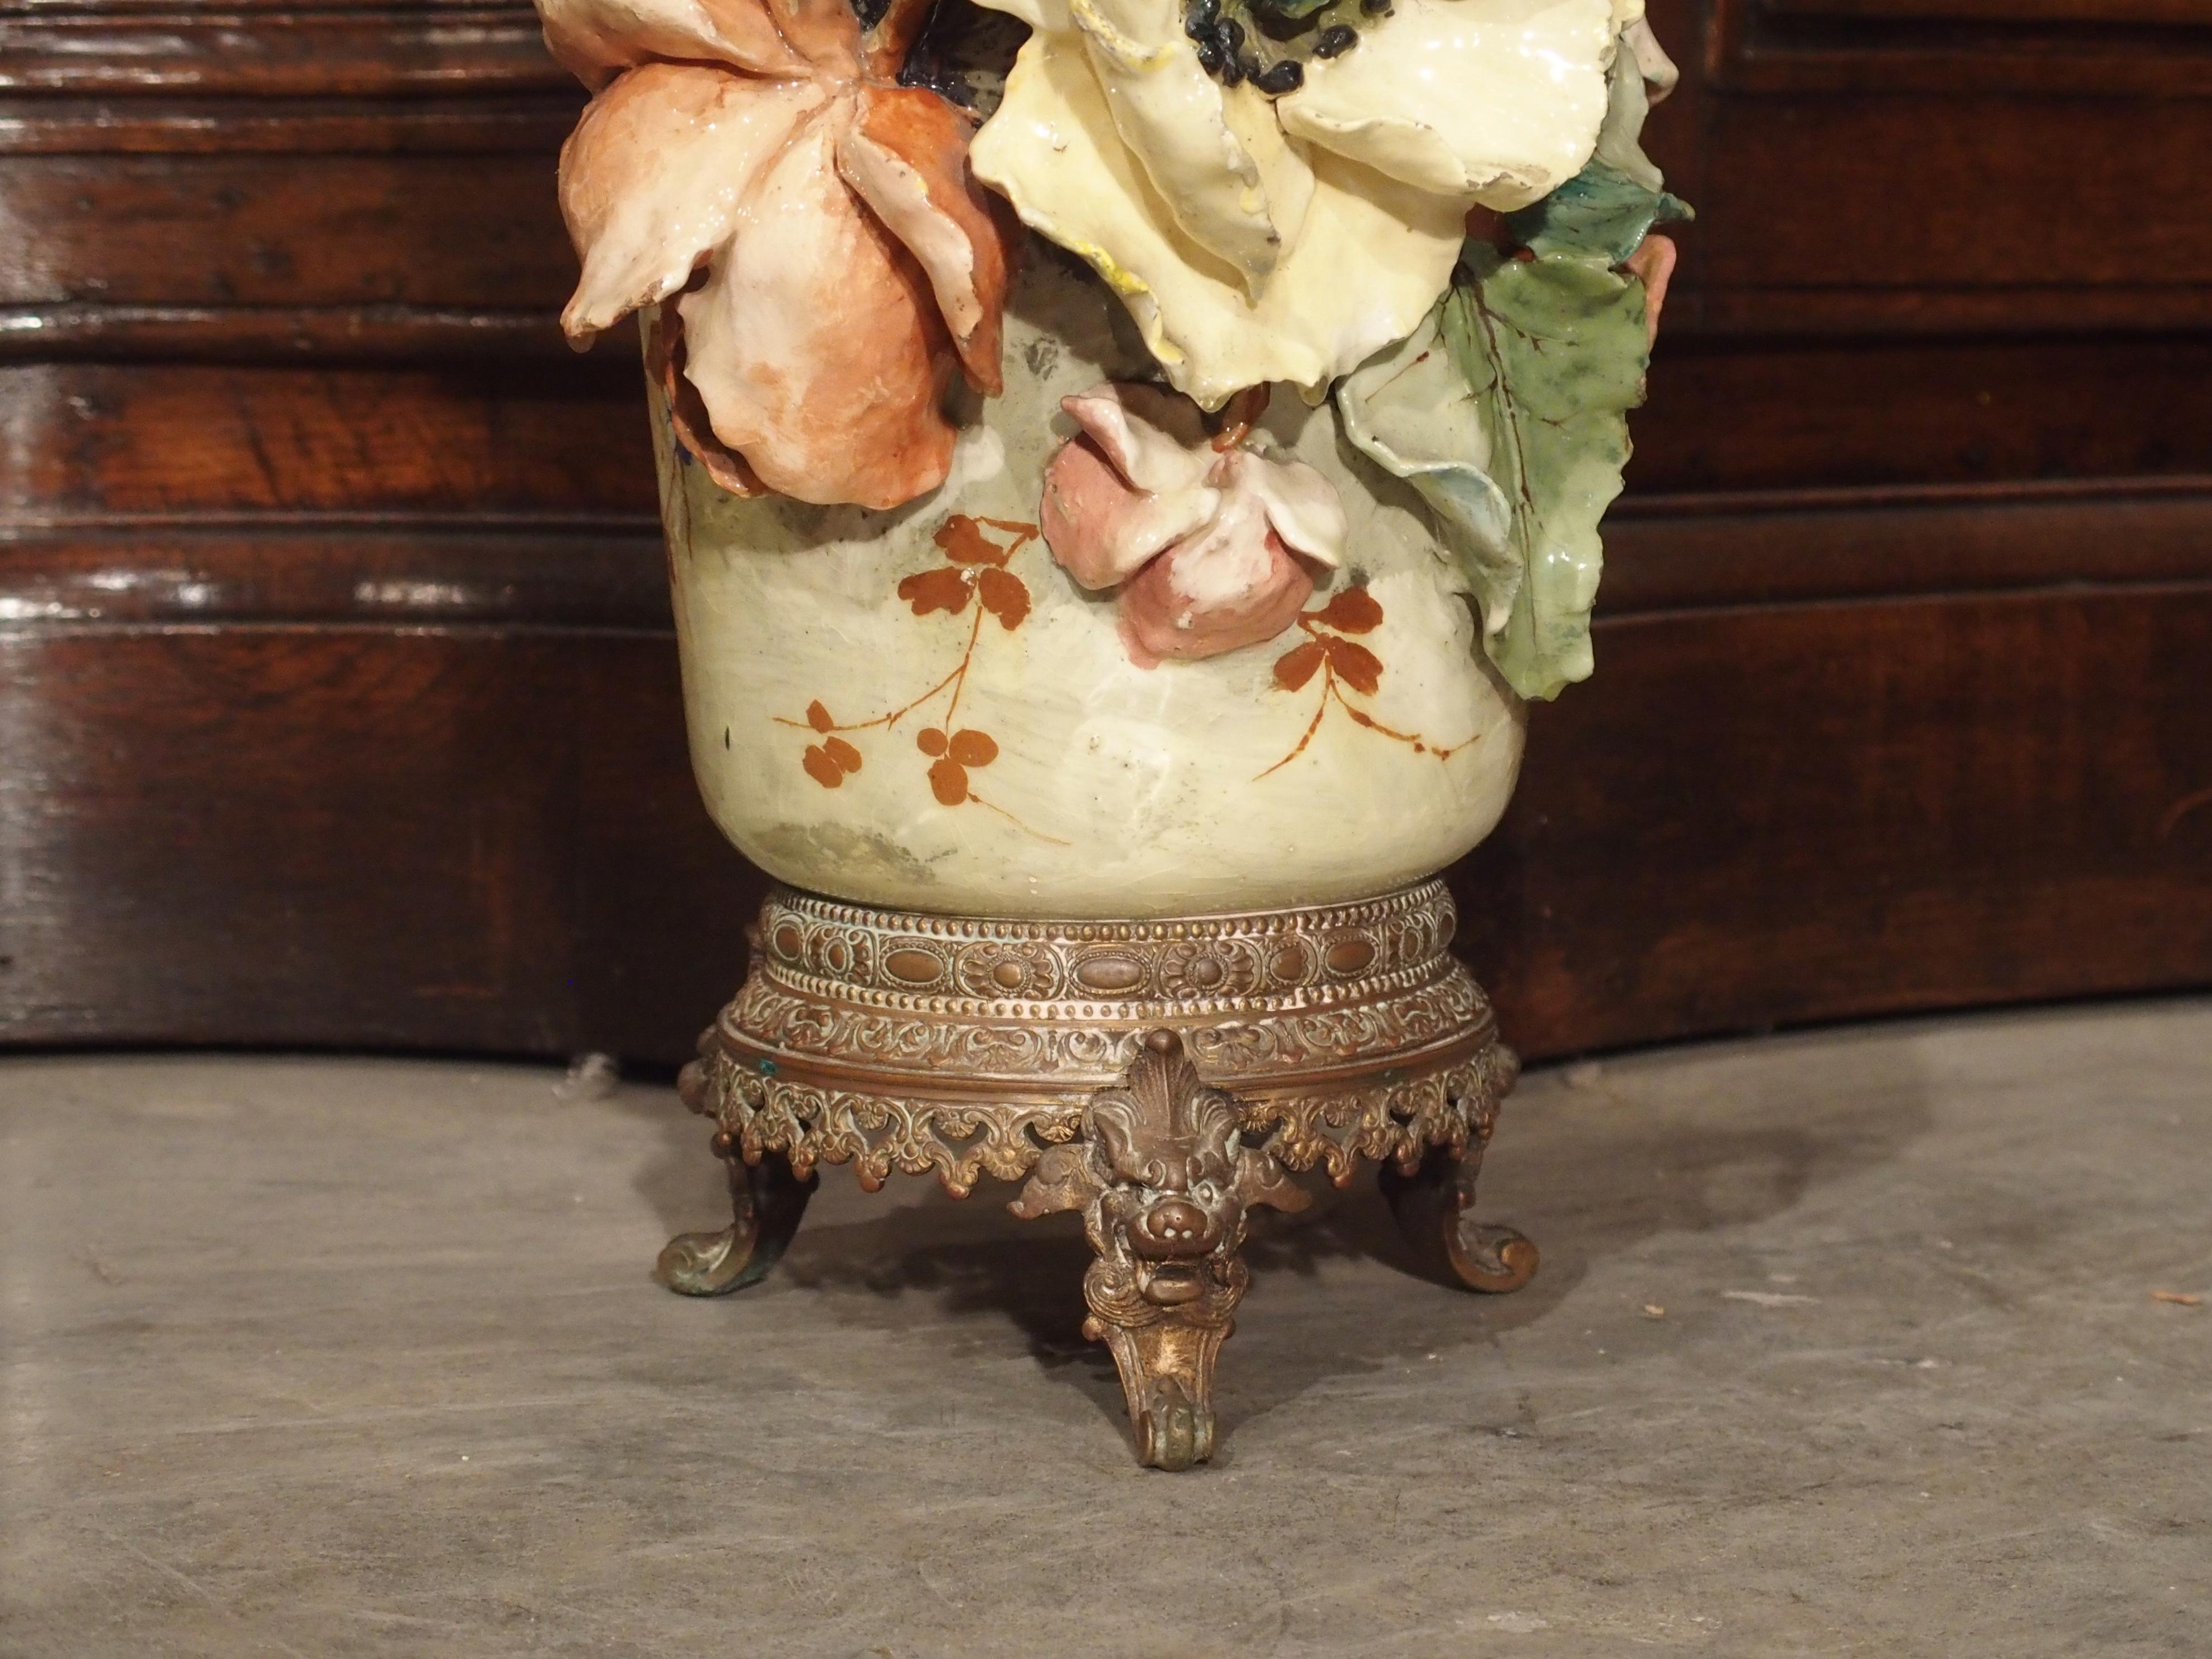 Fired Bronze Mounted Edouard Gilles Barbotine Vase from France, circa 1880